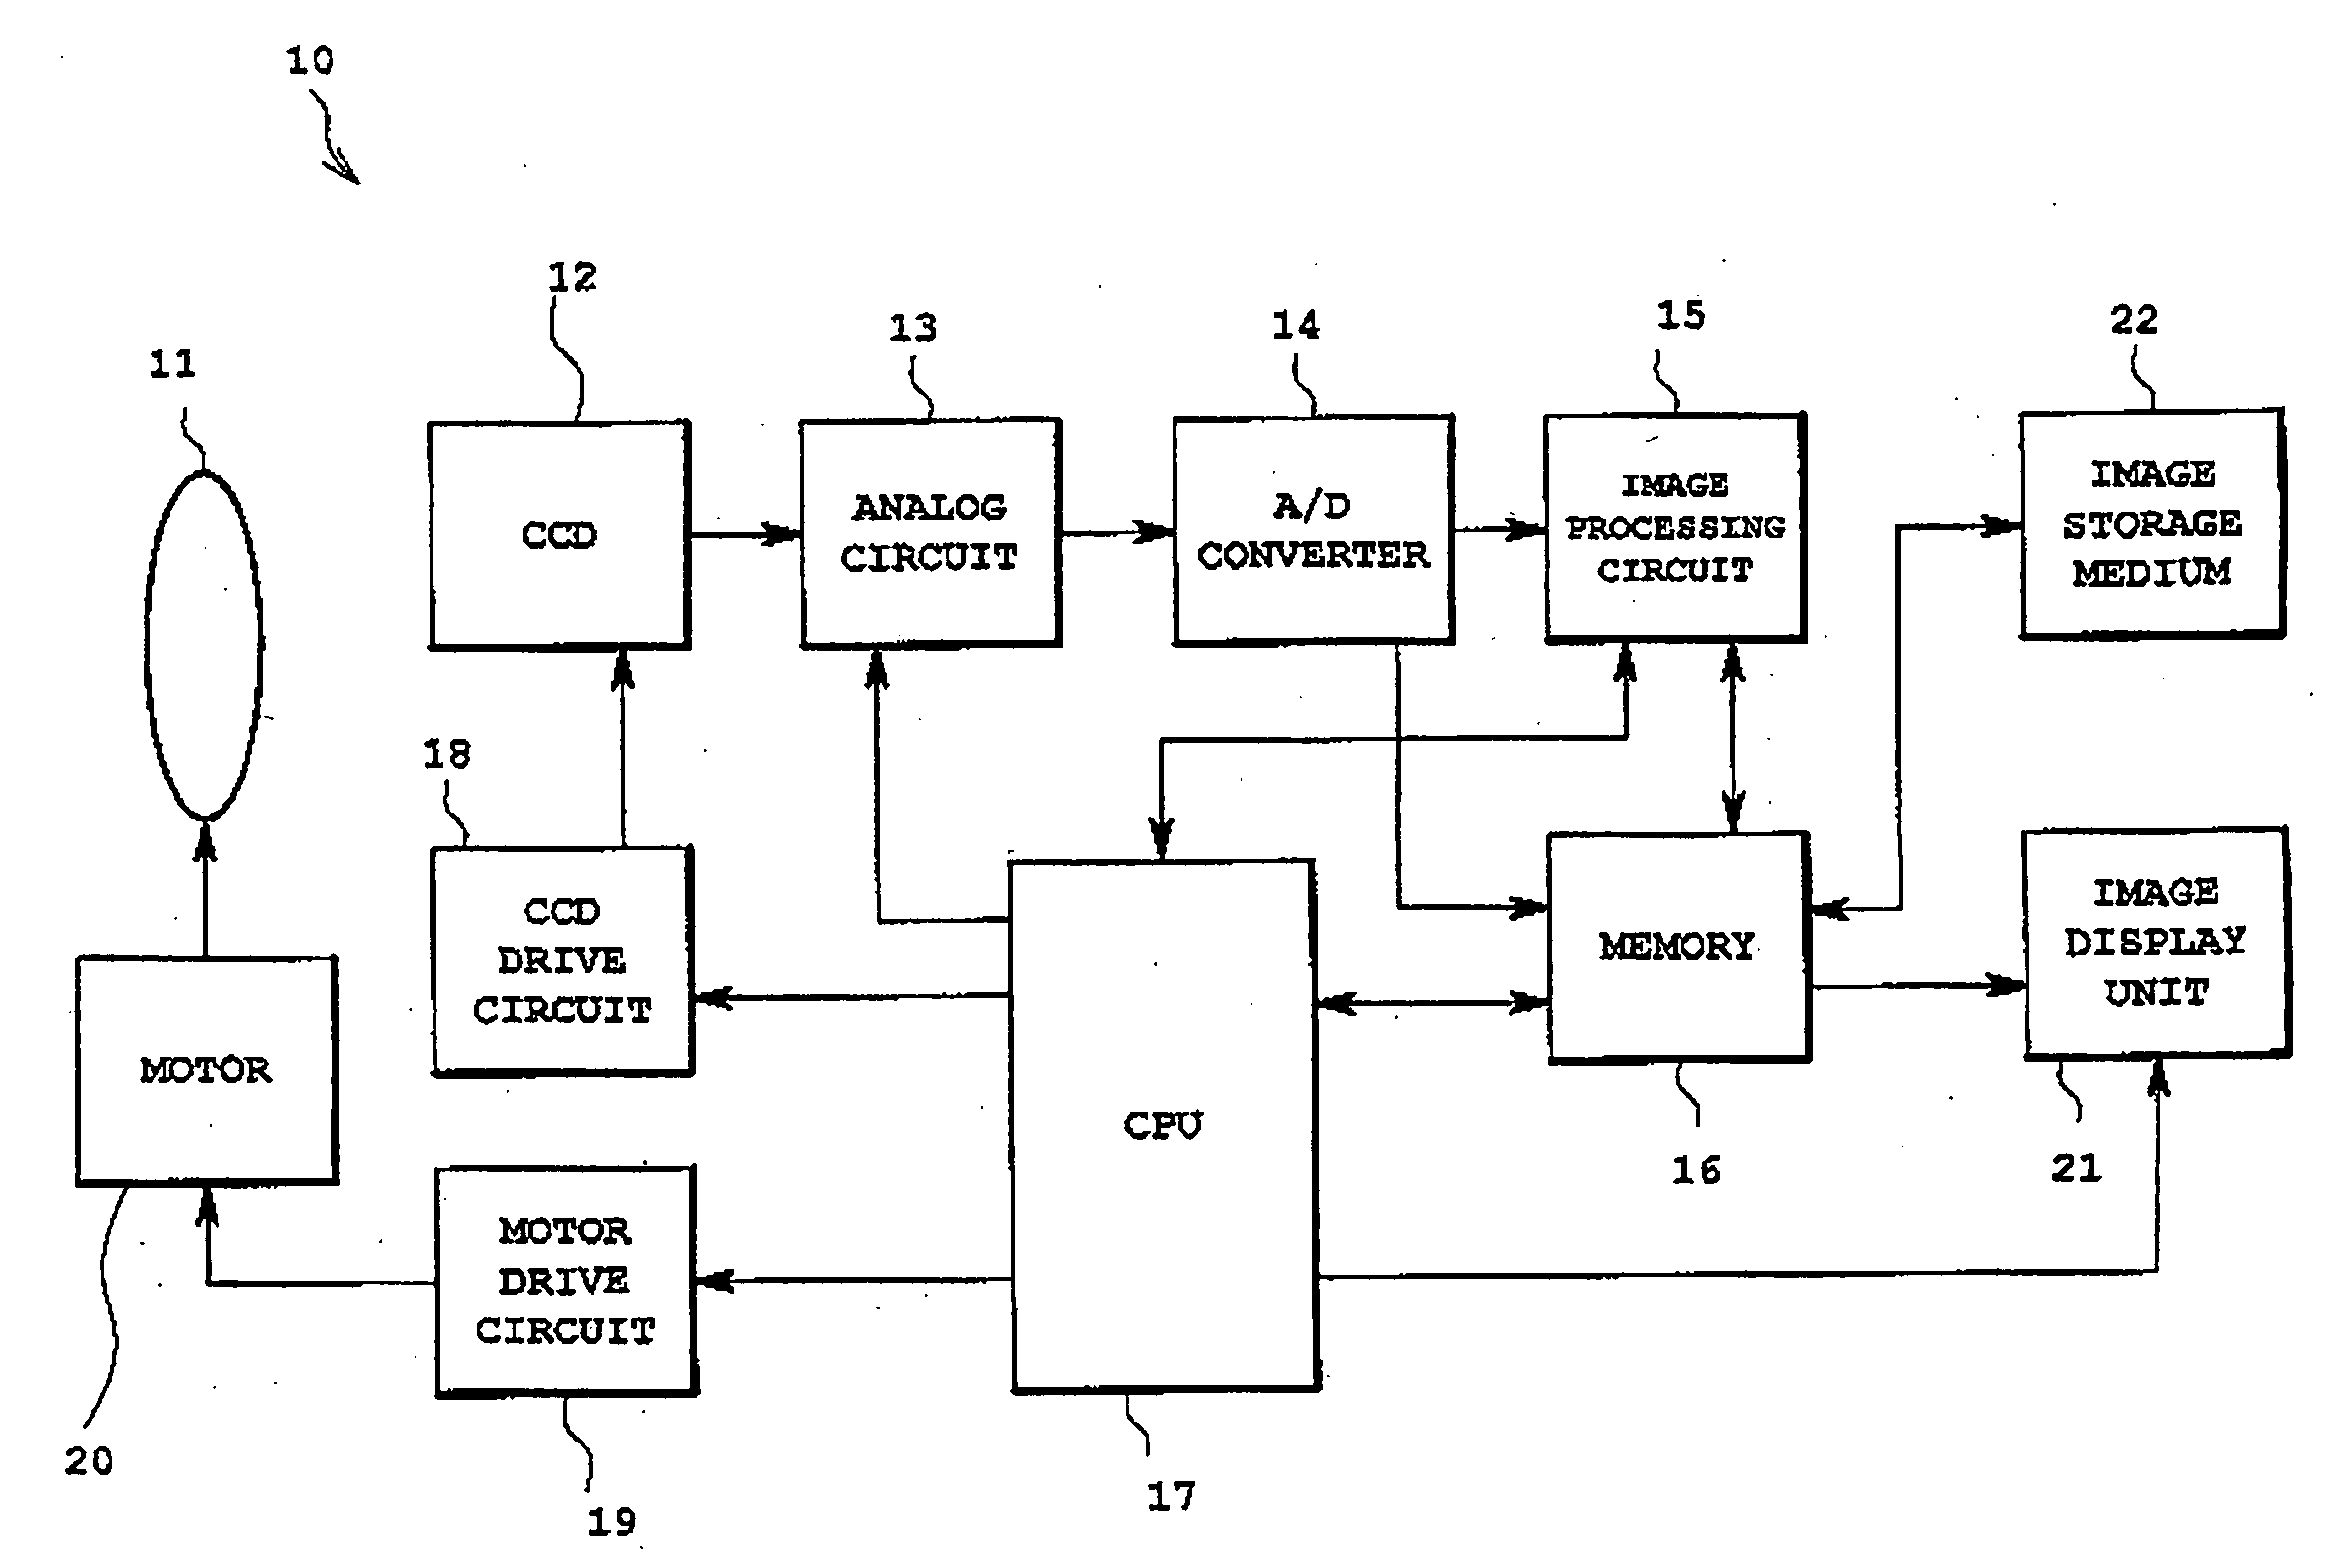 Focal Length Detecting For Image Capture Device